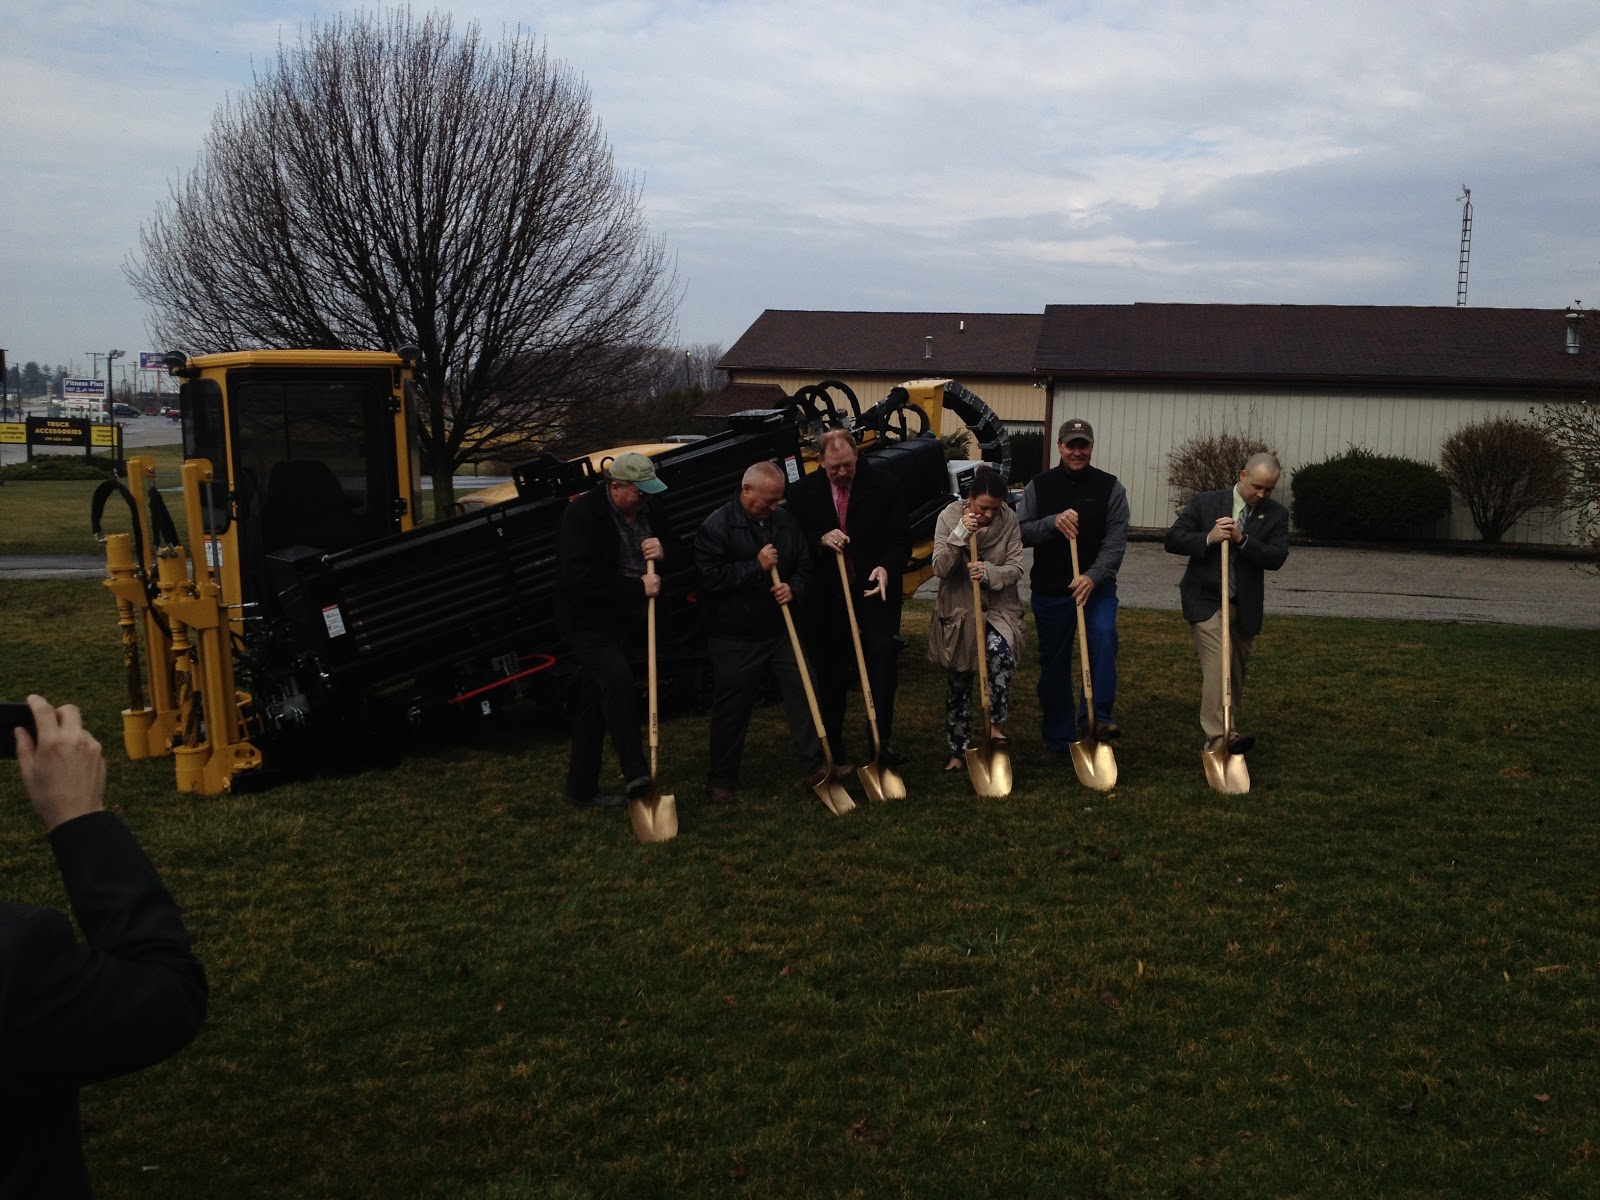 Groundbreaking ceremony for the La Porte County Regional Sewer & Water District project